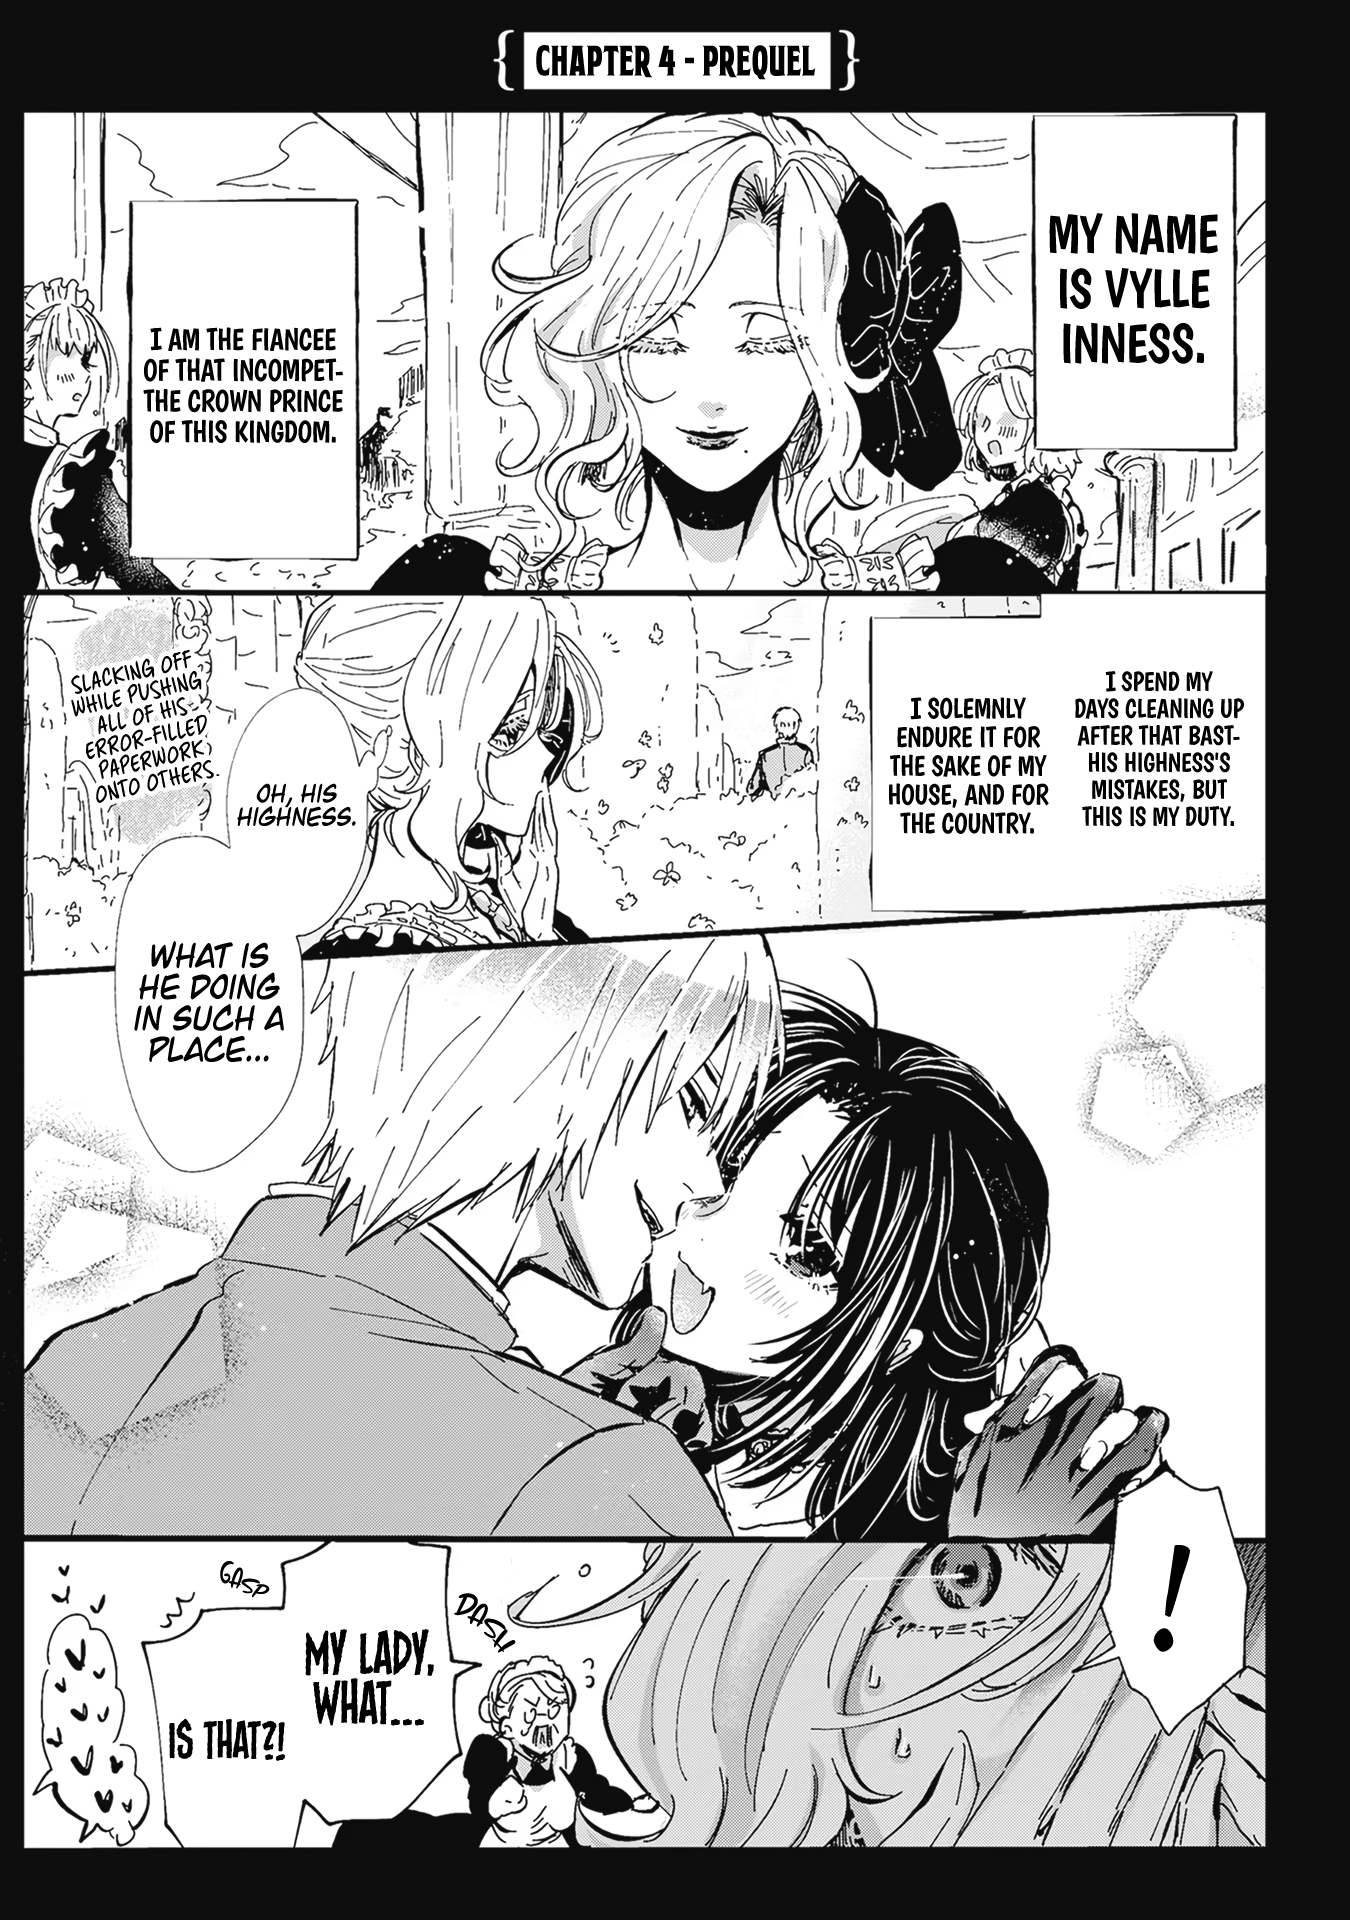 The Villainess Who Steals The Heroine's Heart - Page 1